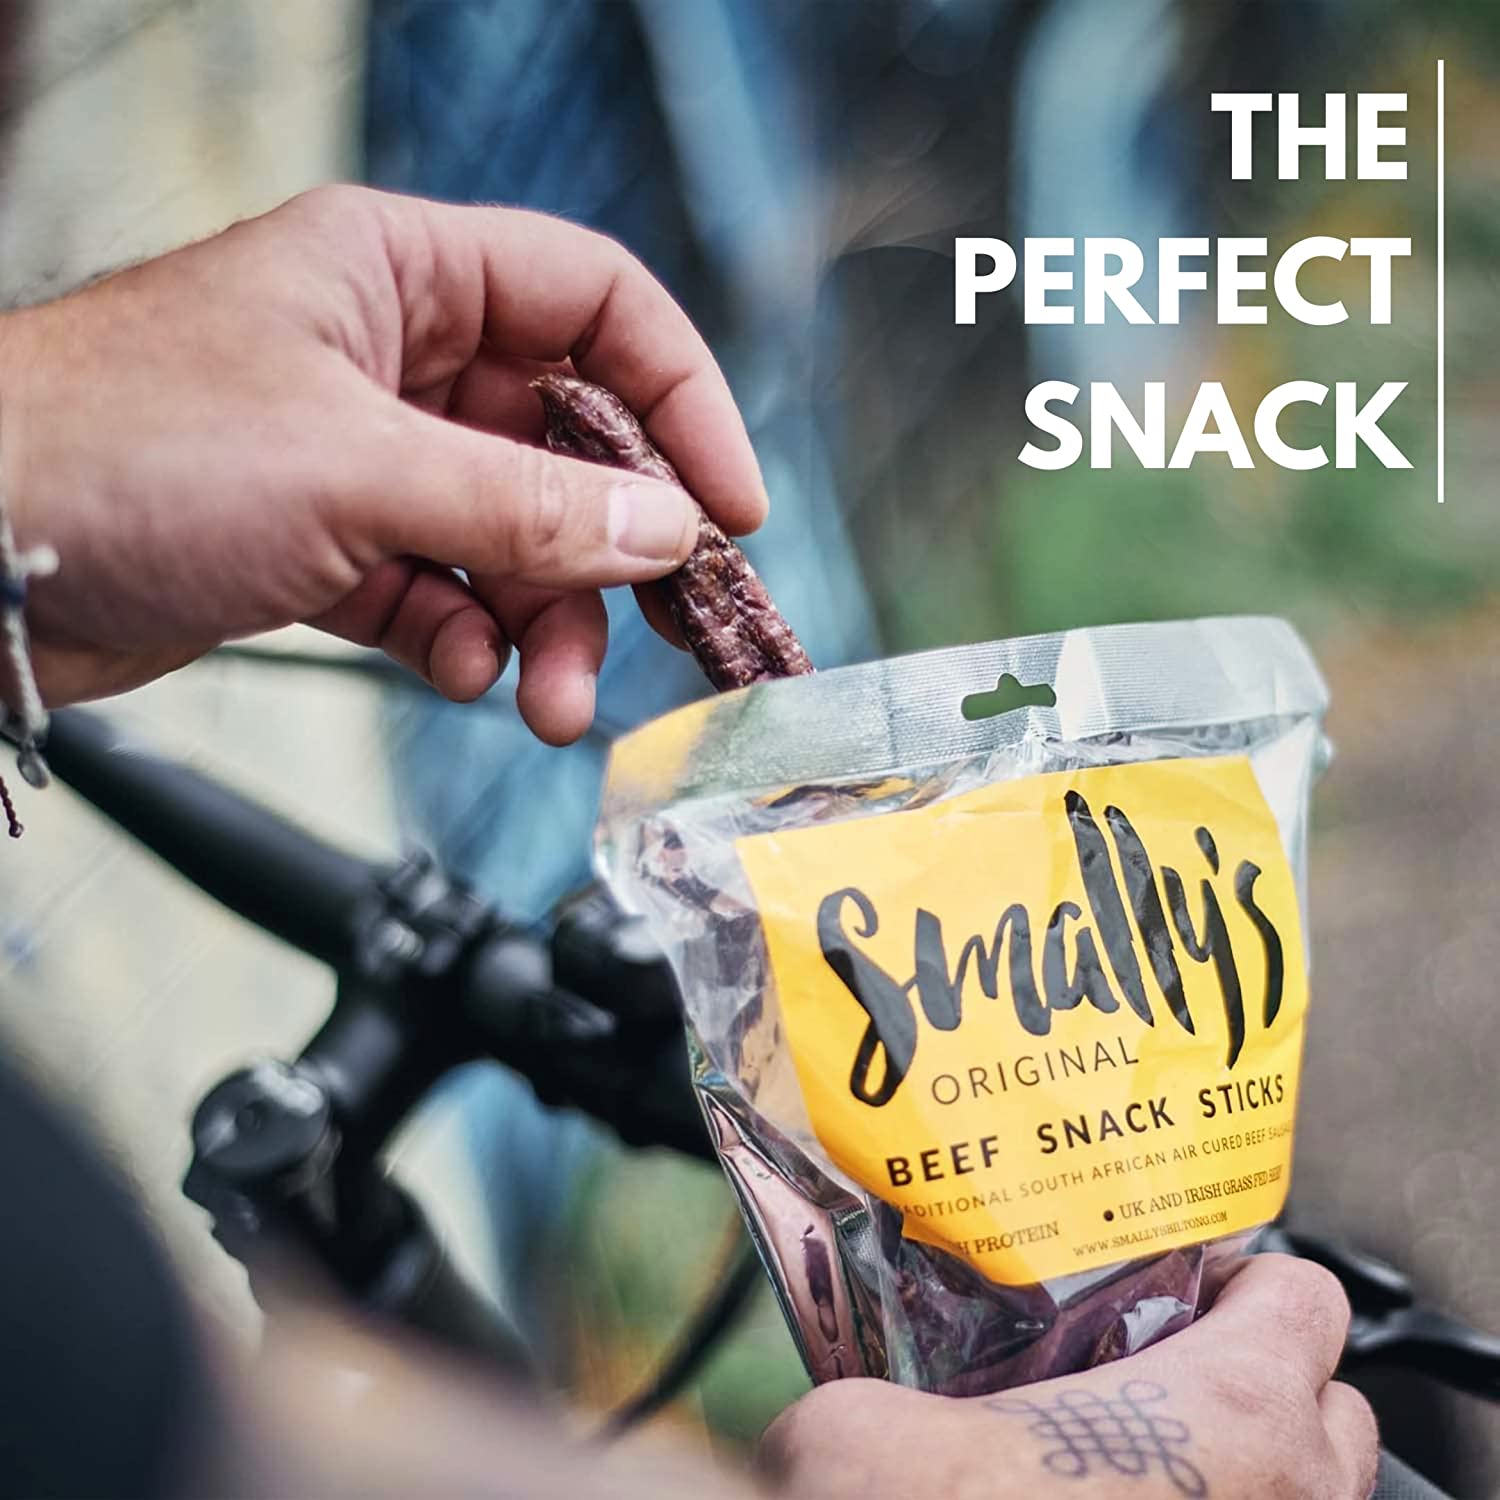 Smally's Biltong Original - High Protein Beef Snack, Ready to Eat, Gluten Free, Low Fat, No Added Sugar, No Artificial Colours or Flavours - 250g Pack - Review UK